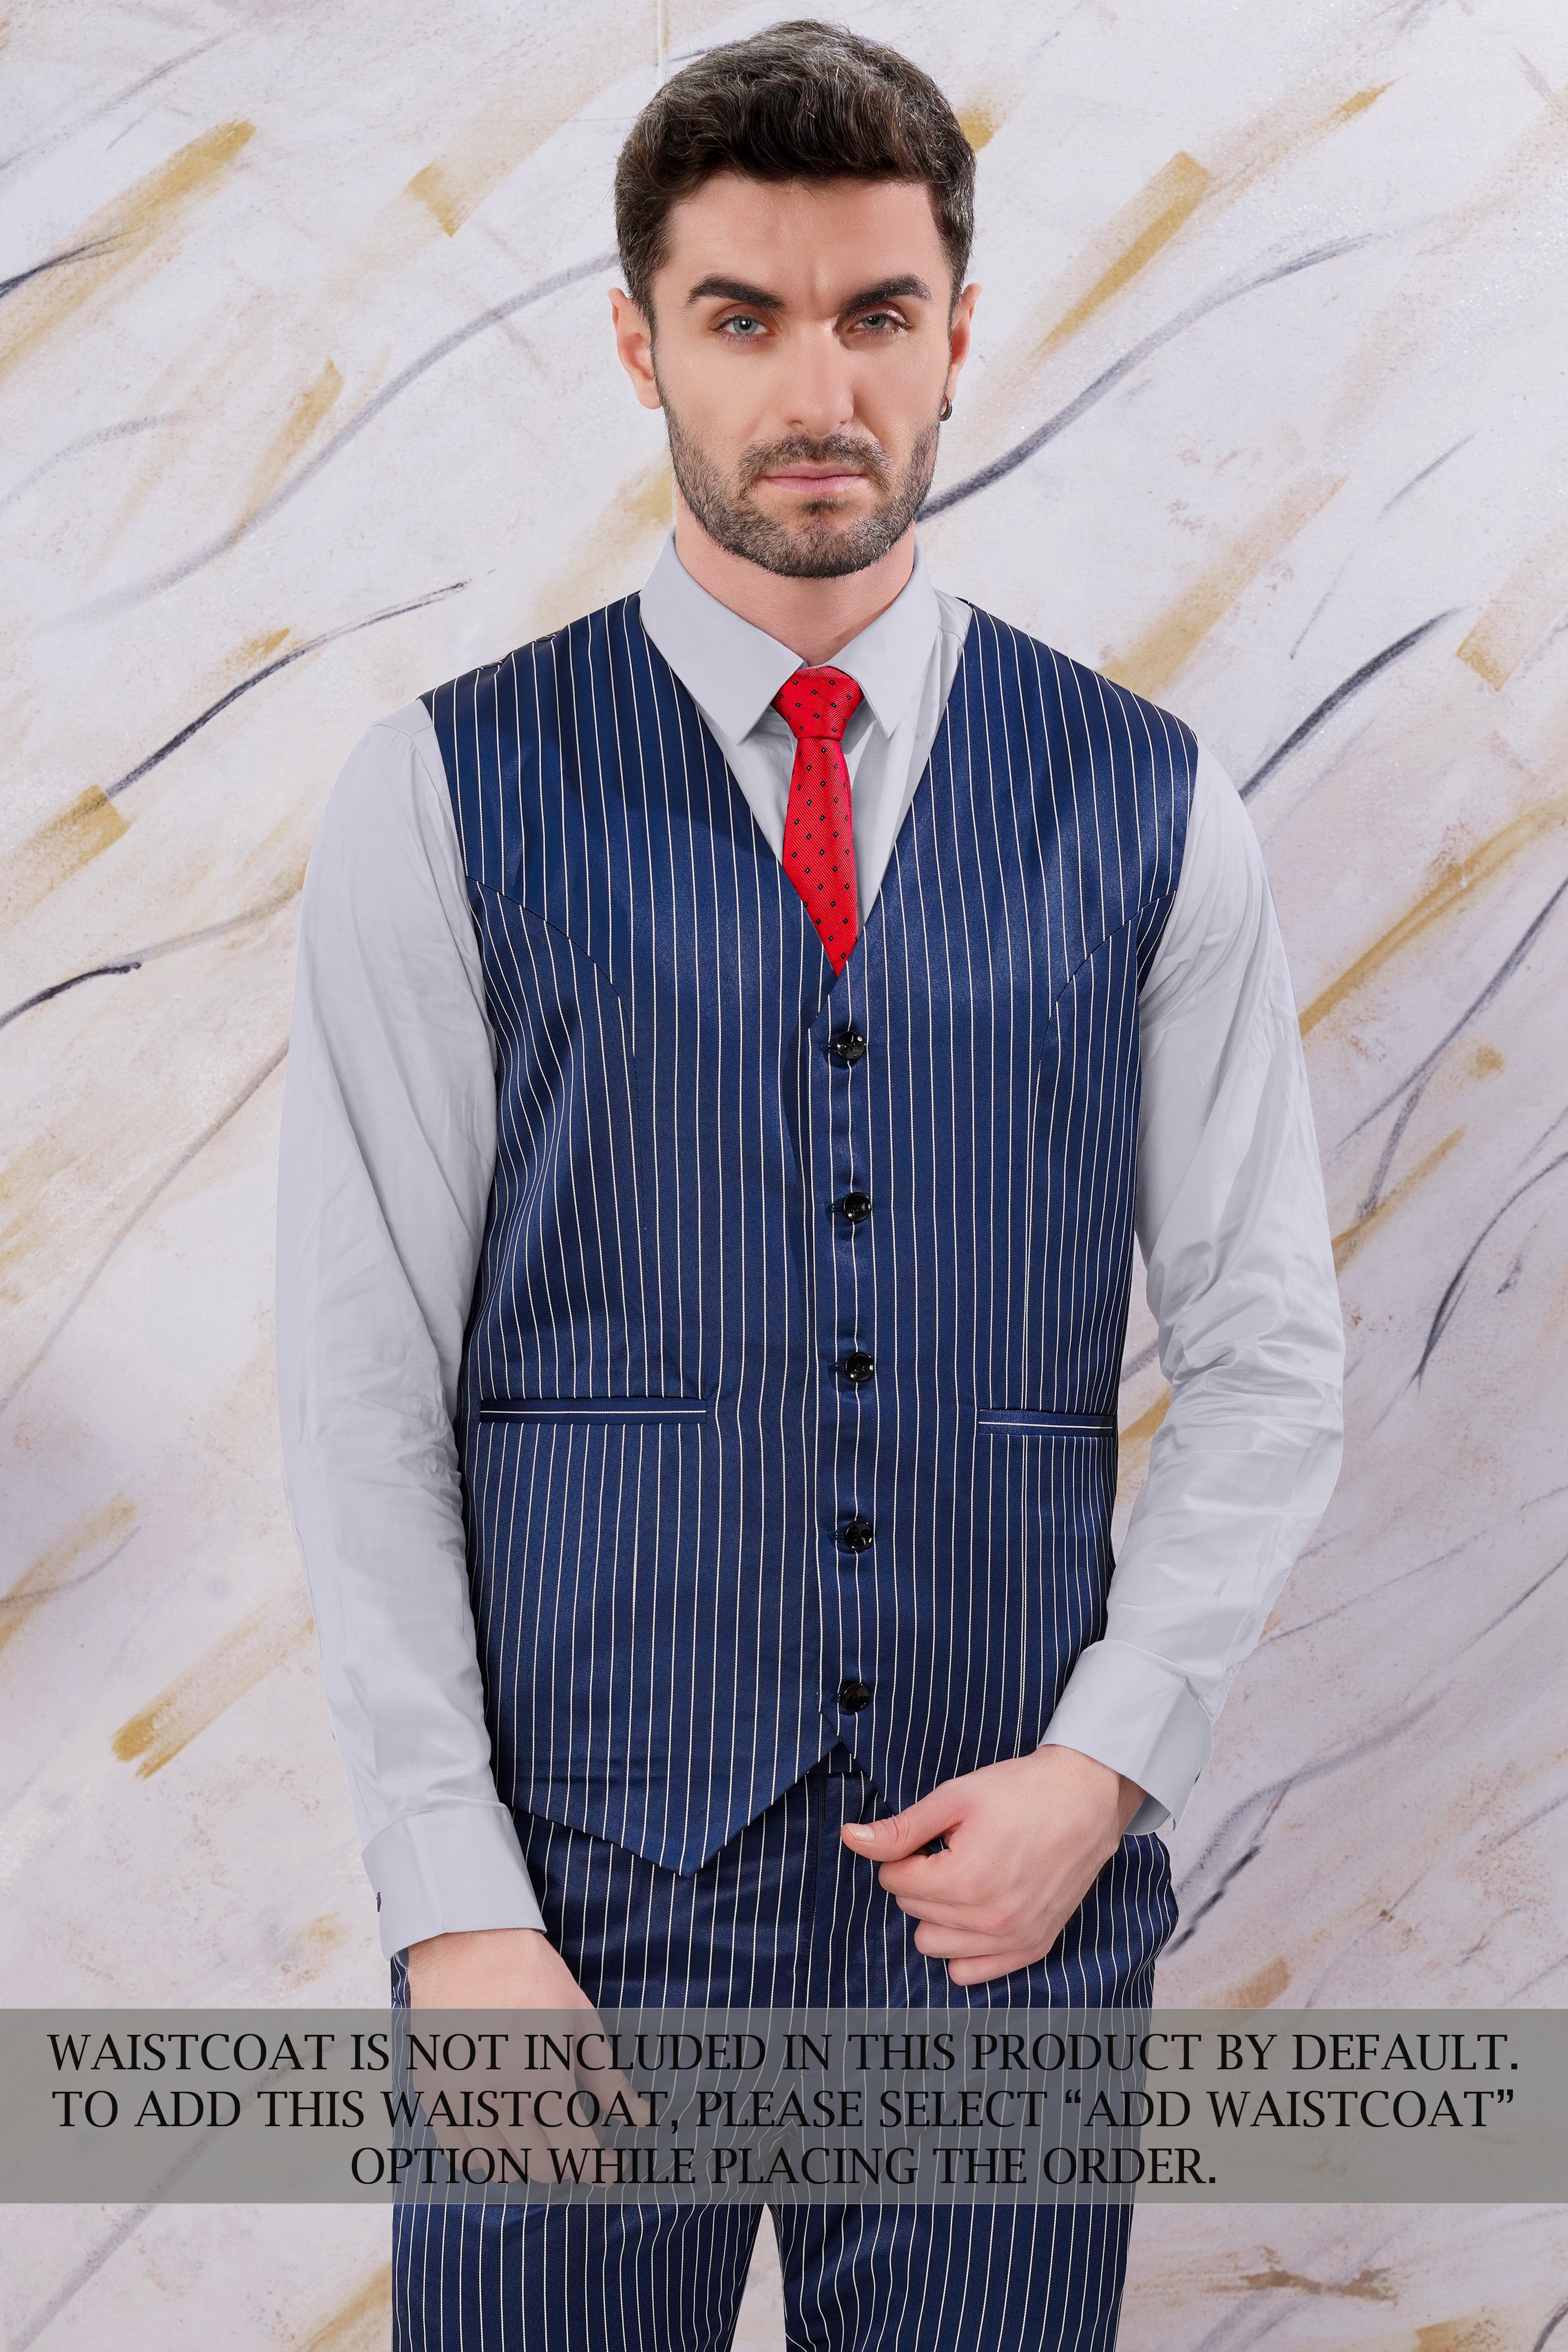 Cinder Blue and White Striped Wool Rich Suit ST3096-SB-36, ST3096-SB-38, ST3096-SB-40, ST3096-SB-42, ST3096-SB-44, ST3096-SB-46, ST3096-SB-48, ST3096-SB-50, ST3096-SB-52, ST3096-SB-54, ST3096-SB-56, ST3096-SB-58, ST3096-SB-60